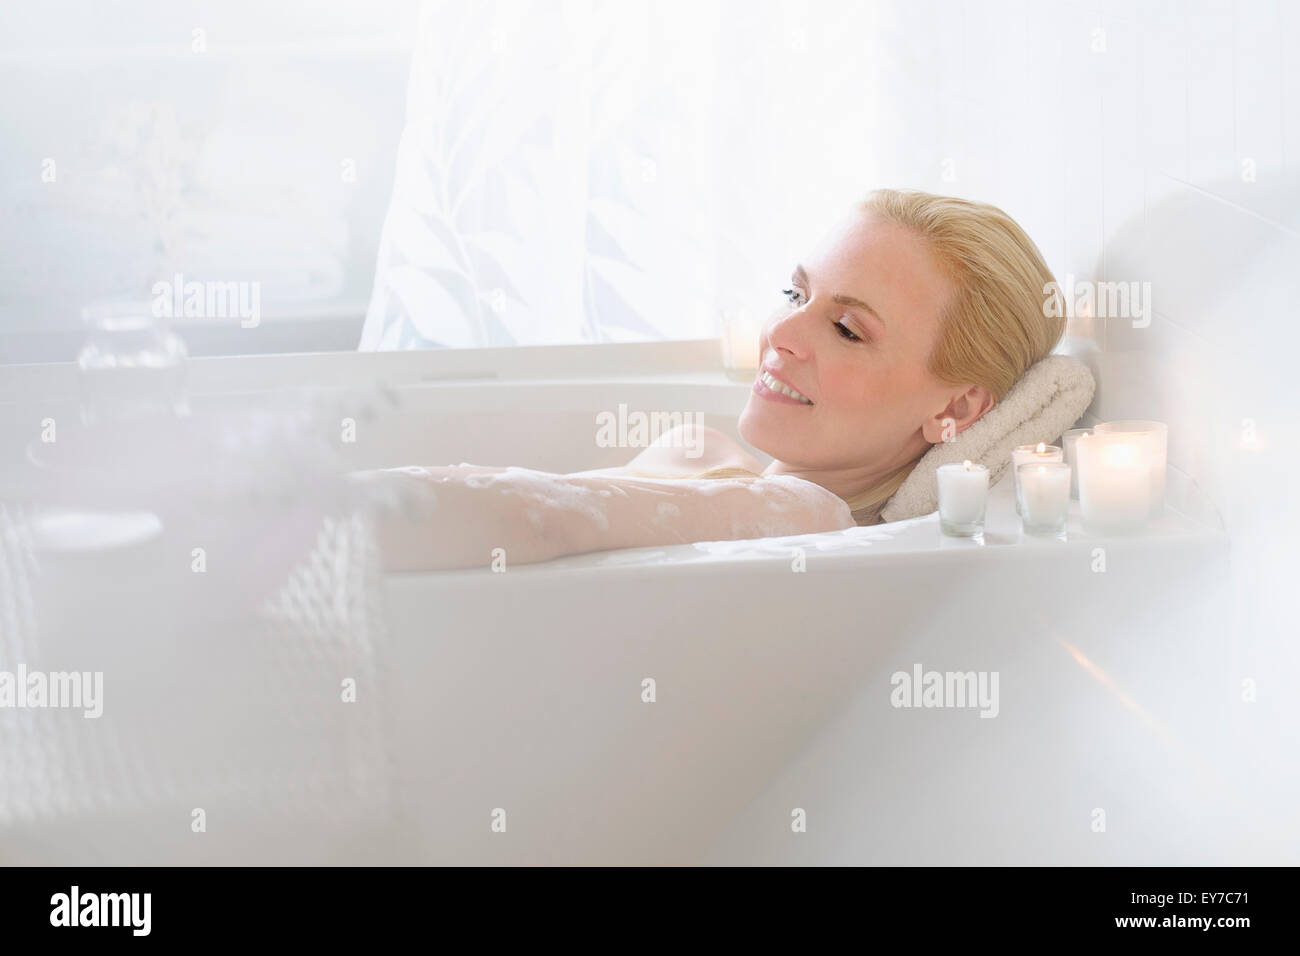 Woman relaxing in bath Banque D'Images